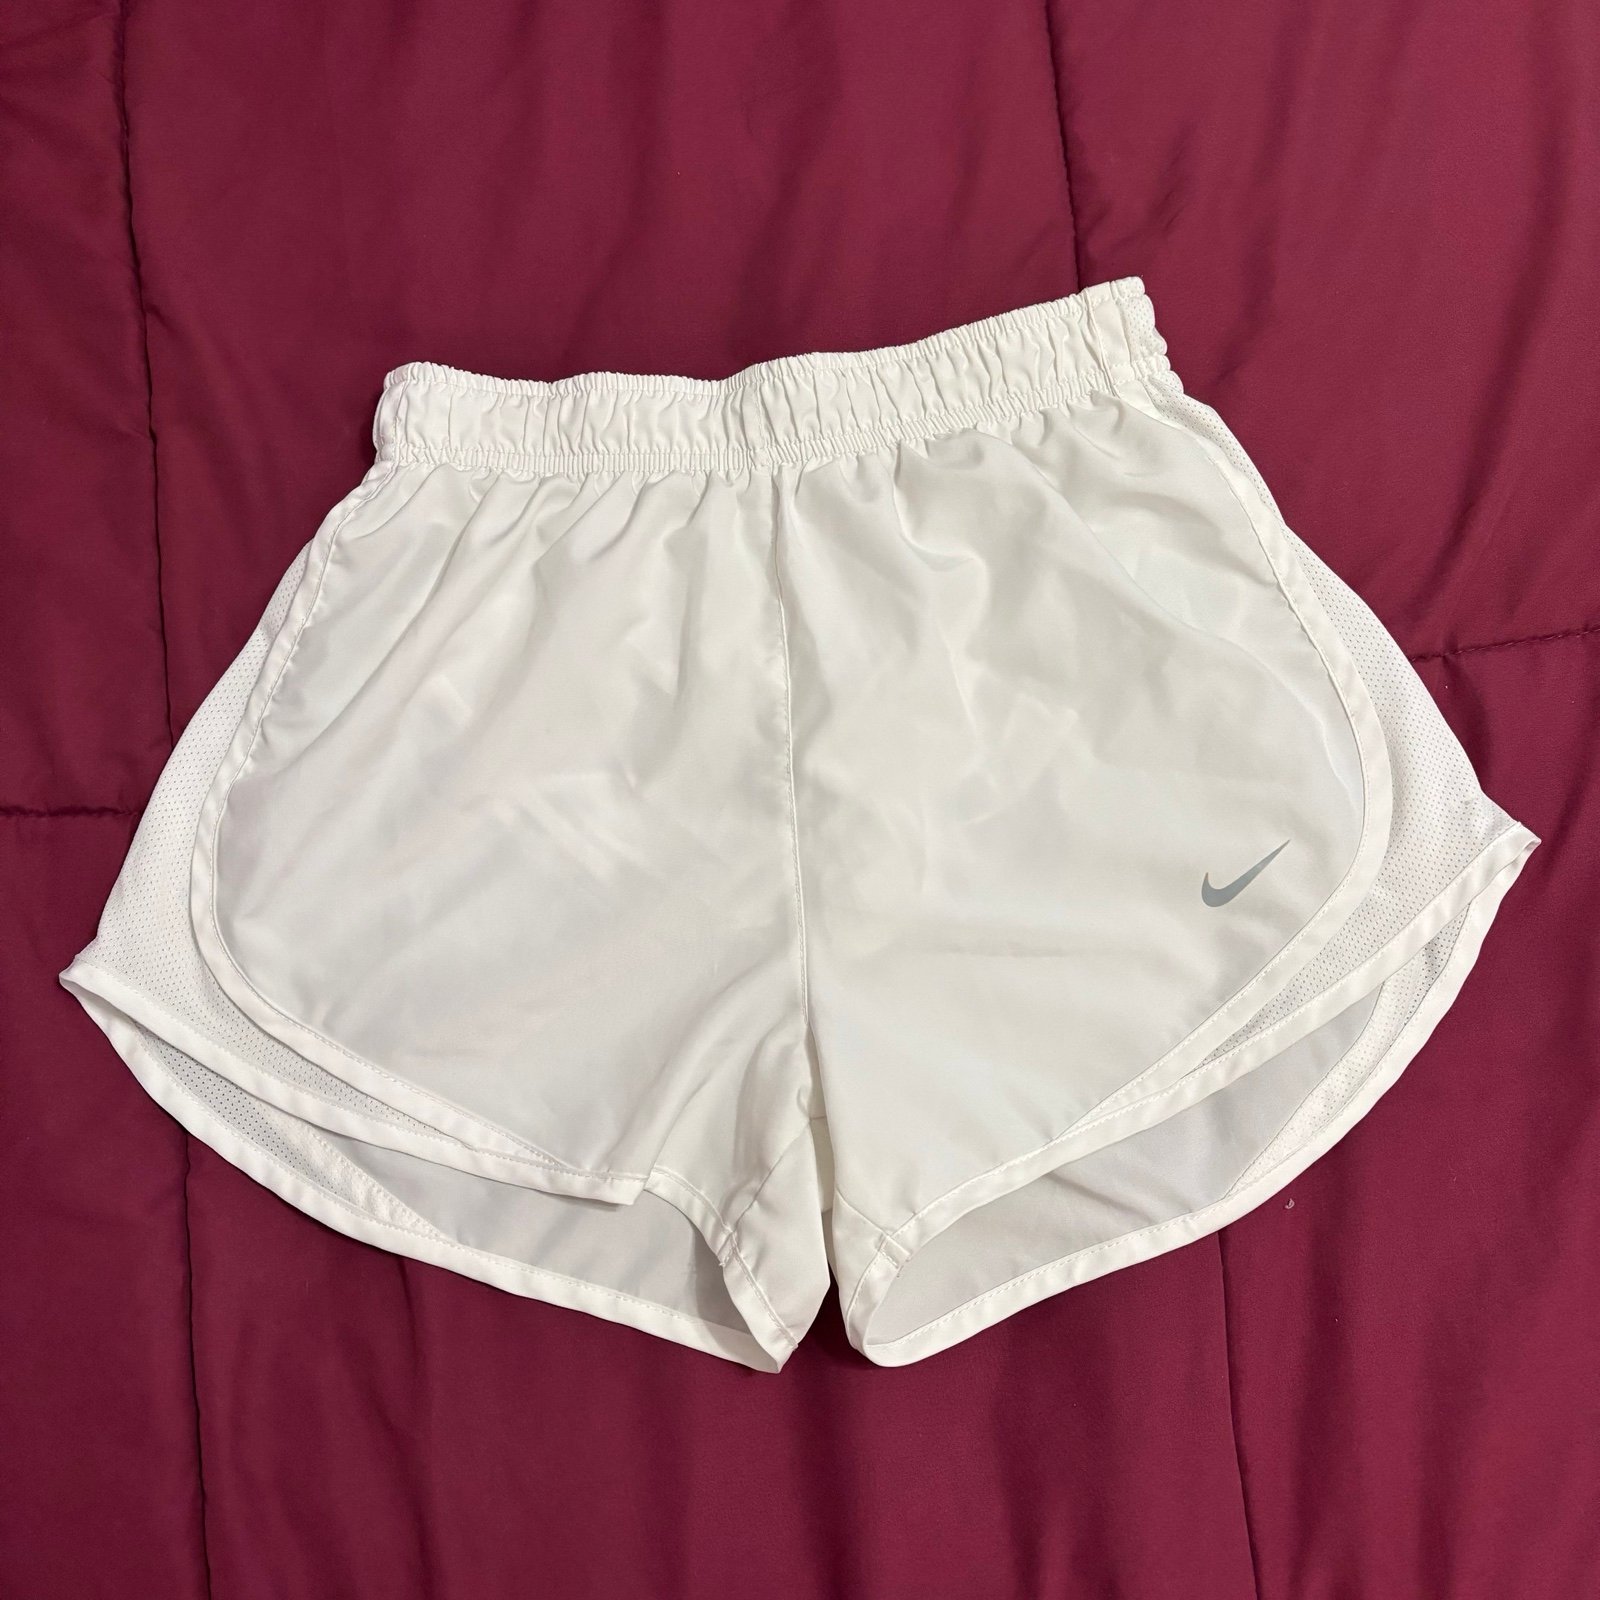 the Lowest price Nike Dri fit white shorts ow5ybOfMY ju